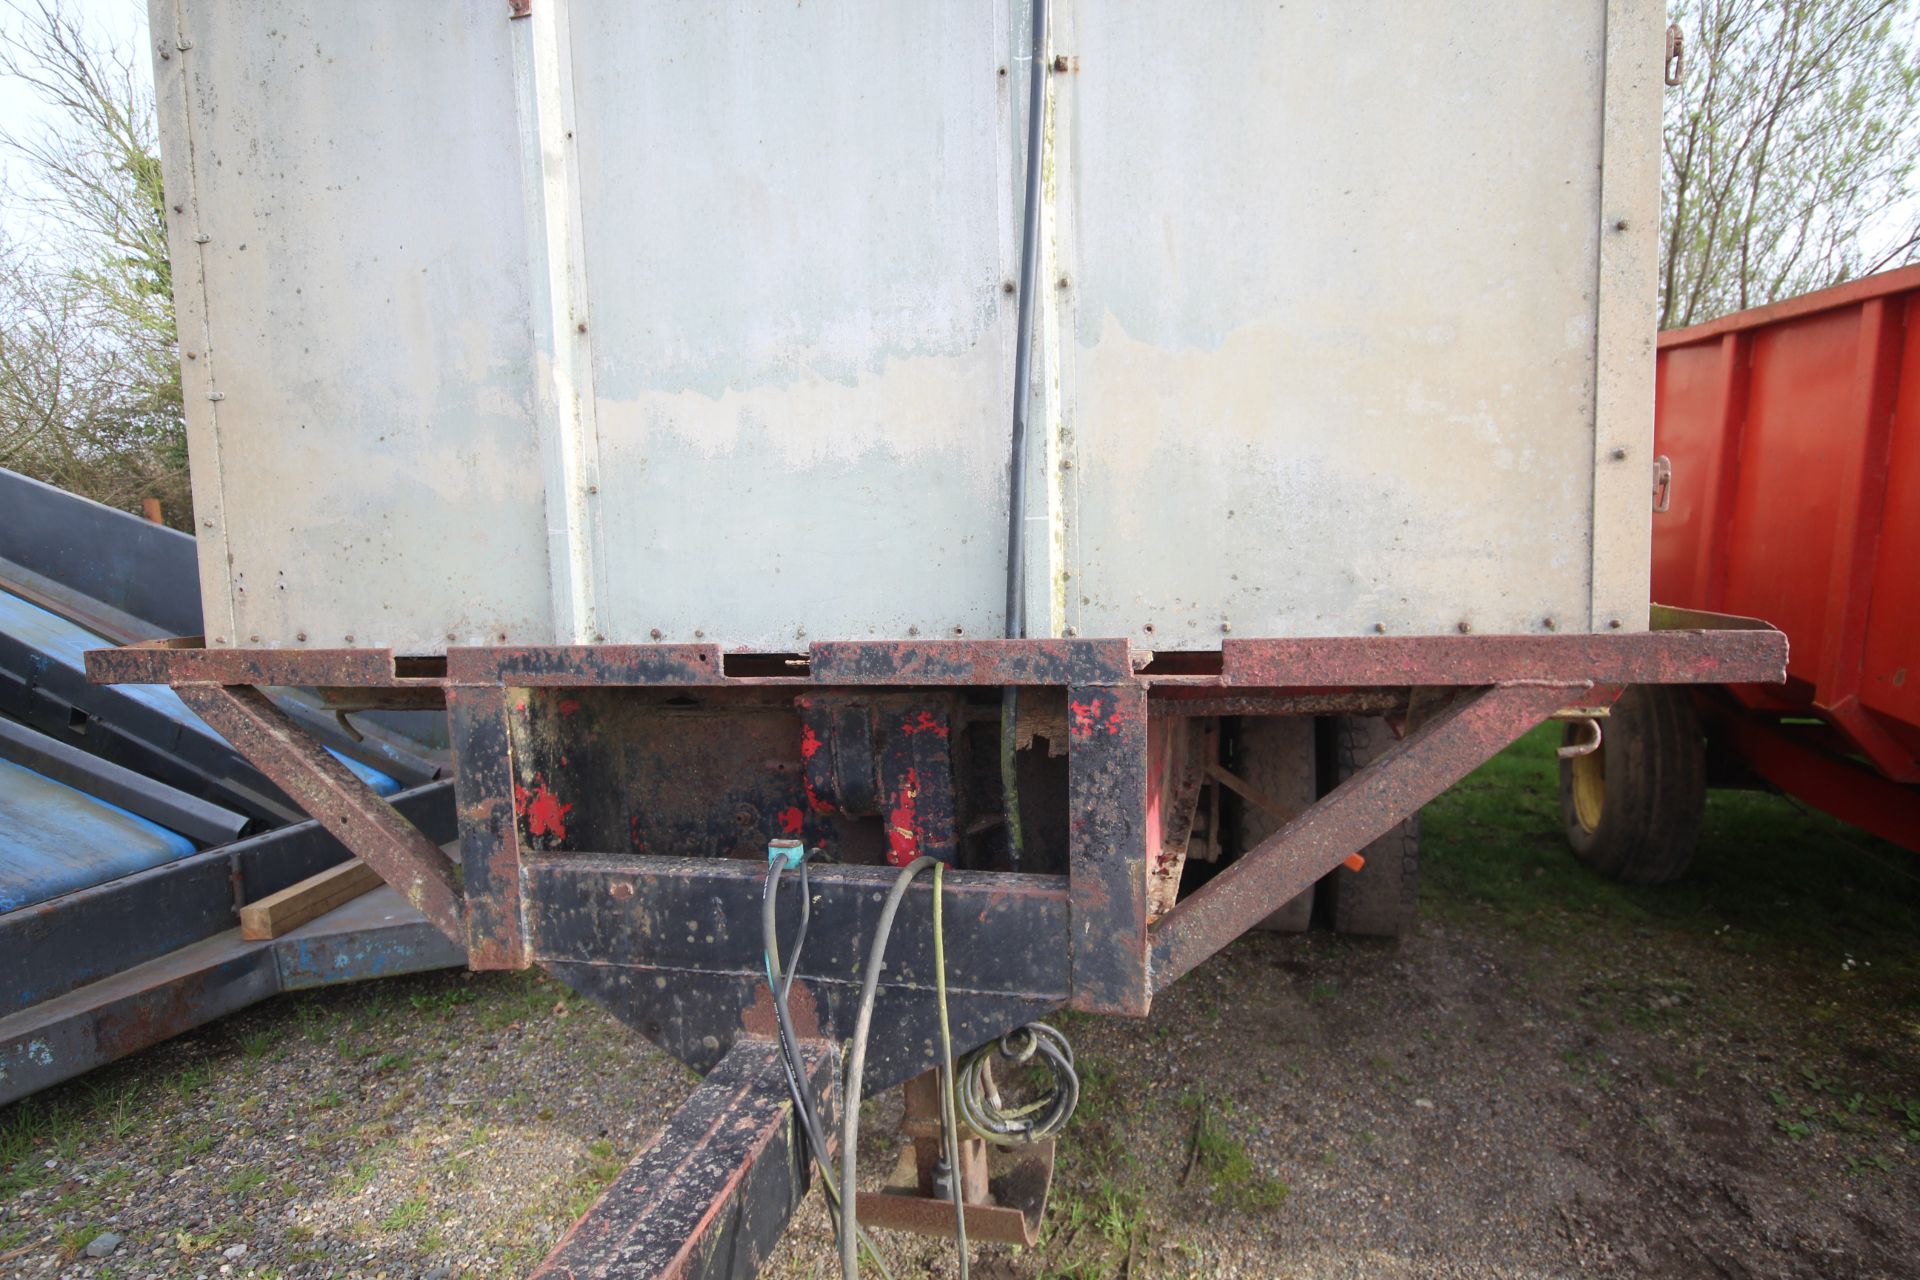 19ft 6in twin axle tractor drawn livestock trailer. Ex-lorry drag. With steel suspension and twin - Image 7 of 34